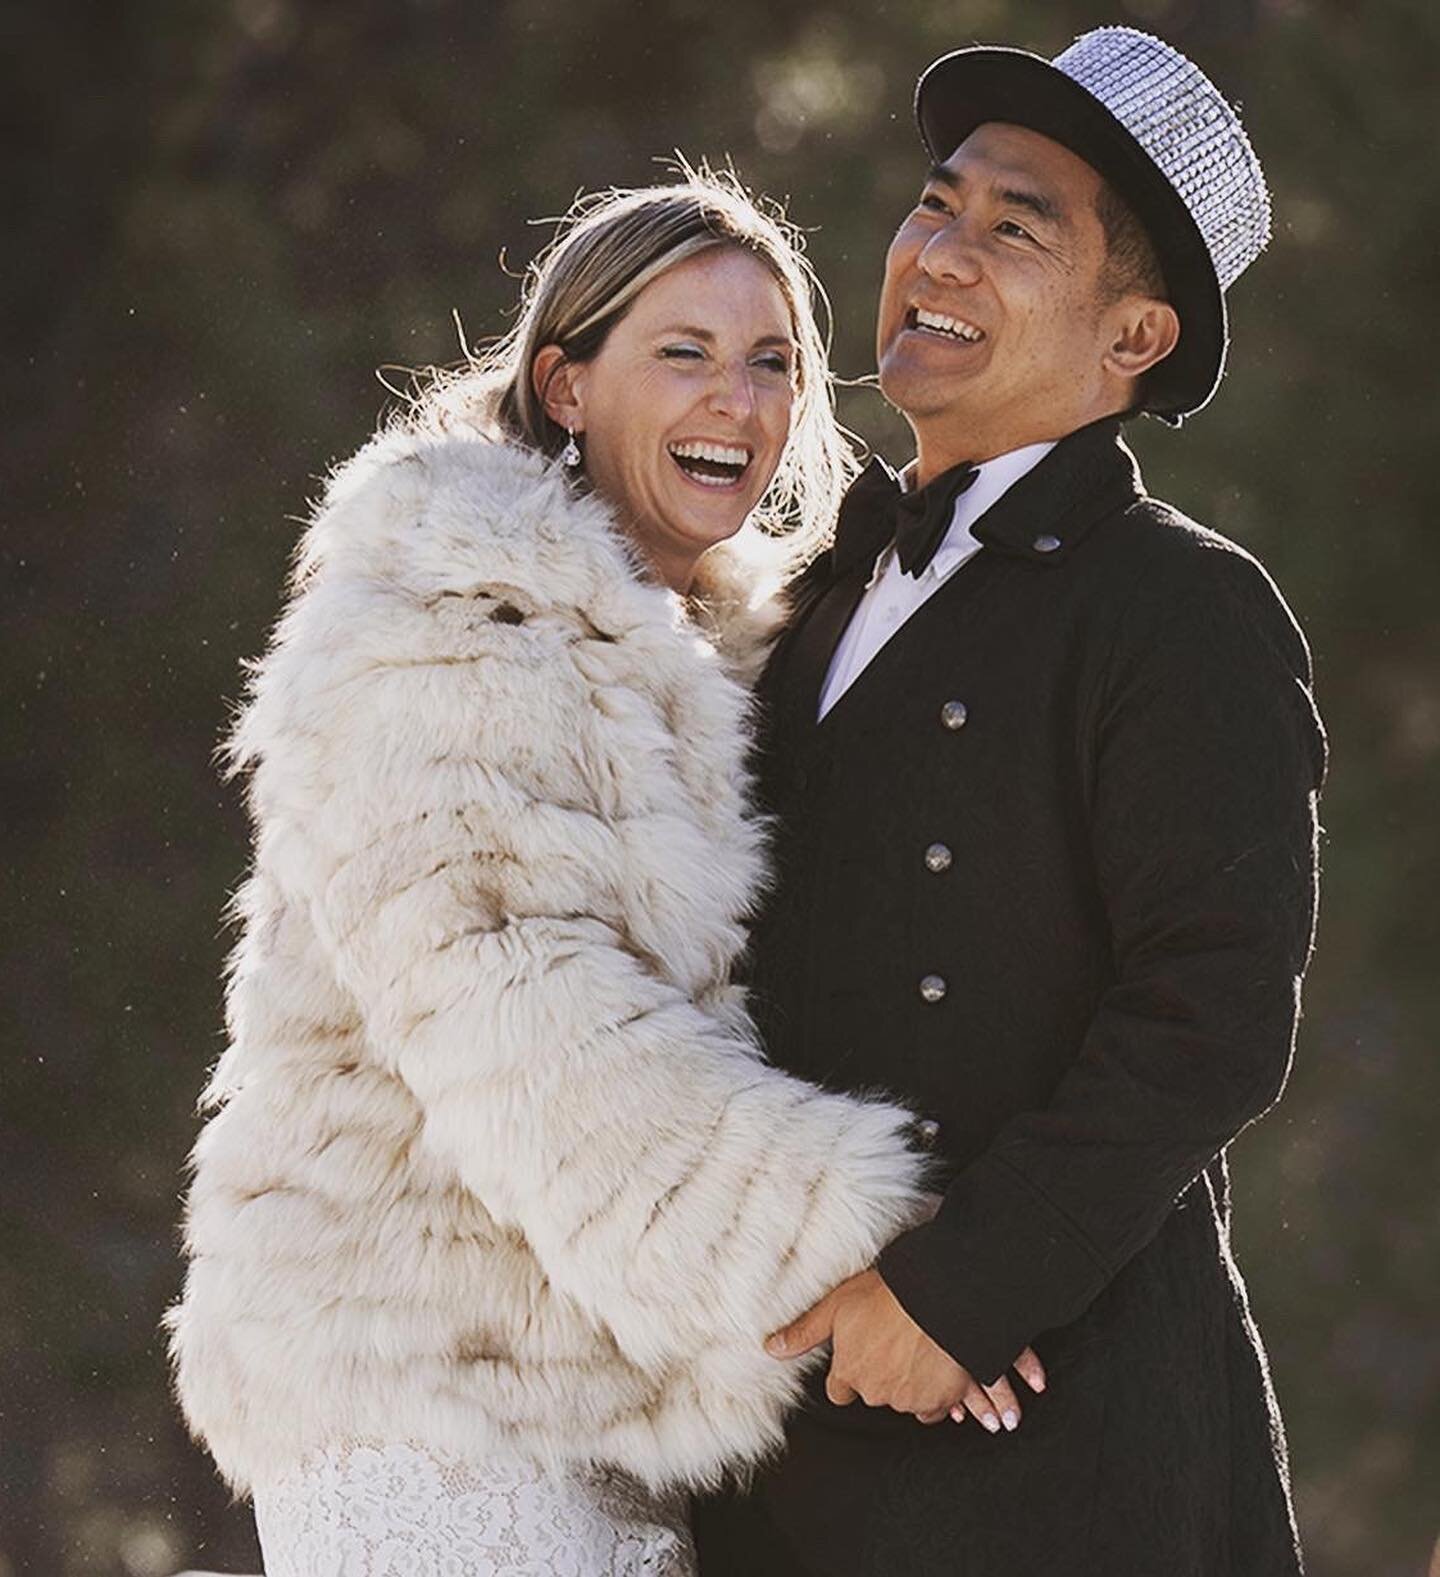 Ready for snow! And love! And winter weddings! Lake Tahoe is a magical place for elopements- thought this fun and playful family were very photogenic! Sidenote on second photo- look how gorgeous hottie wife @spazzy19 is! Love how she paired the more 